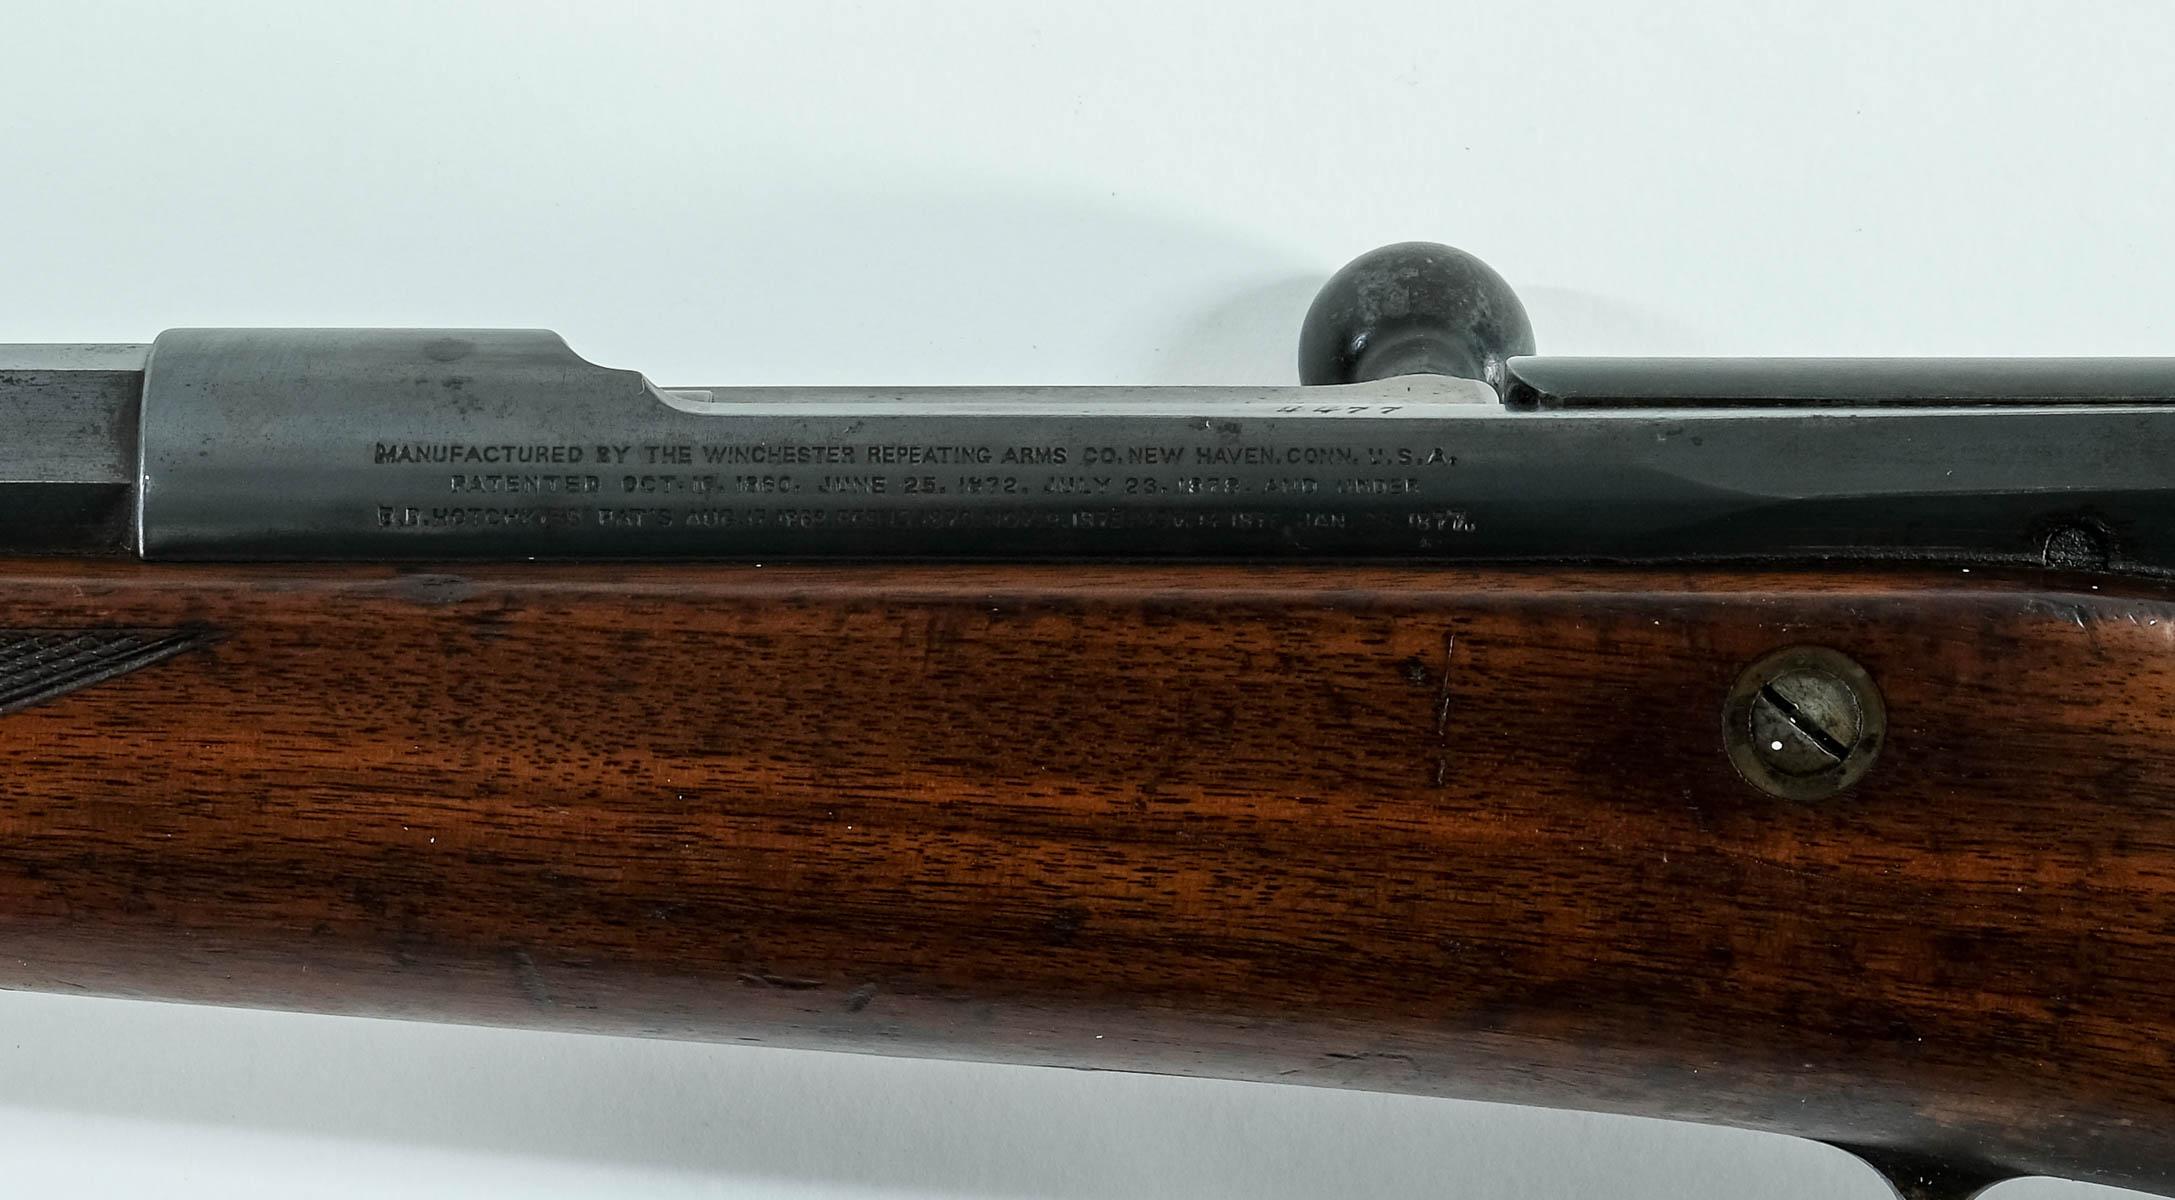 Winchester 1st Hotchkiss Deluxe Sporting Rifle